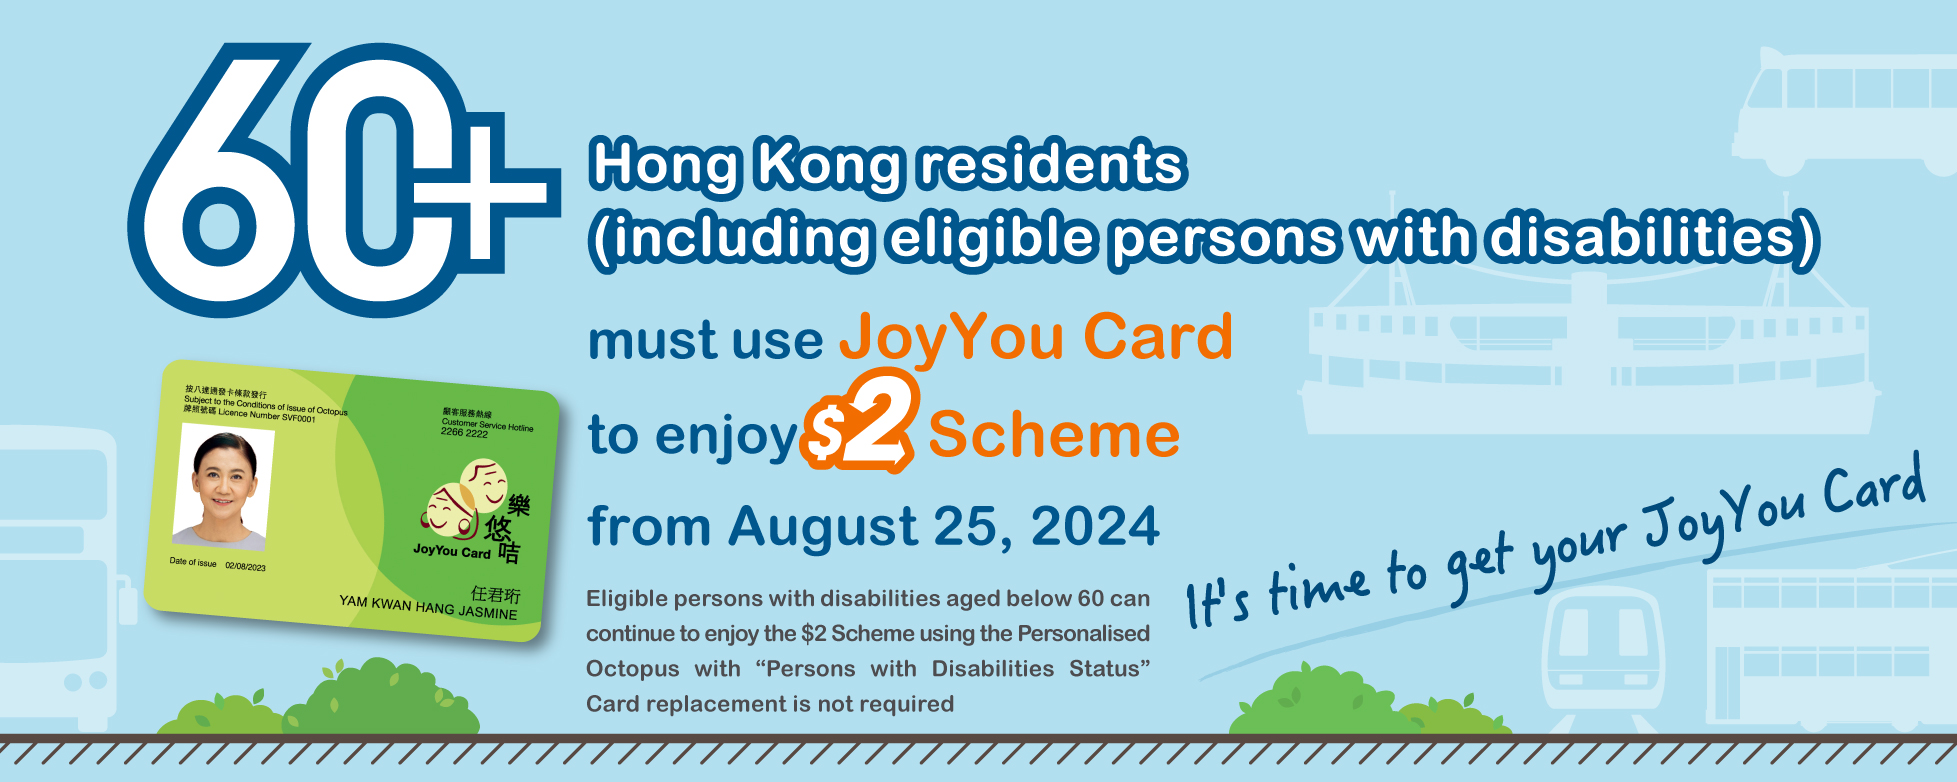 Government Public Transport Fare Concession Scheme for the Elderly and Eligible Persons with Disabilities (the $2 Scheme)